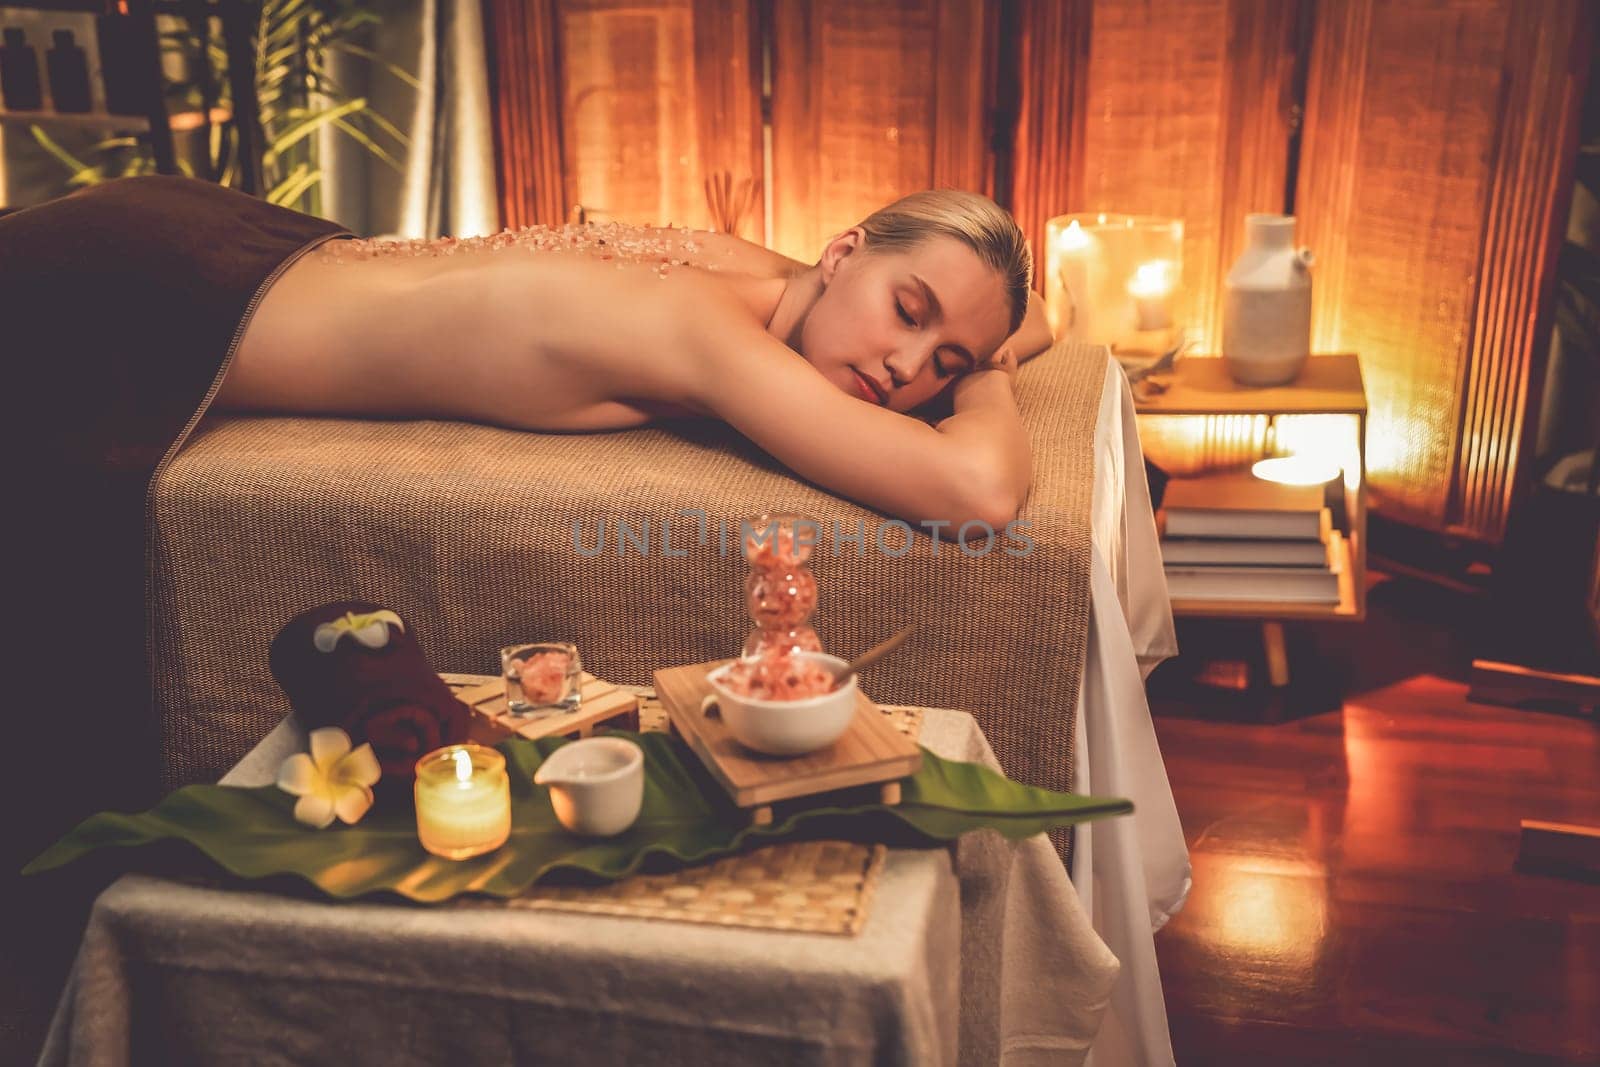 Woman customer having exfoliation treatment in luxury spa. Quiescent by biancoblue